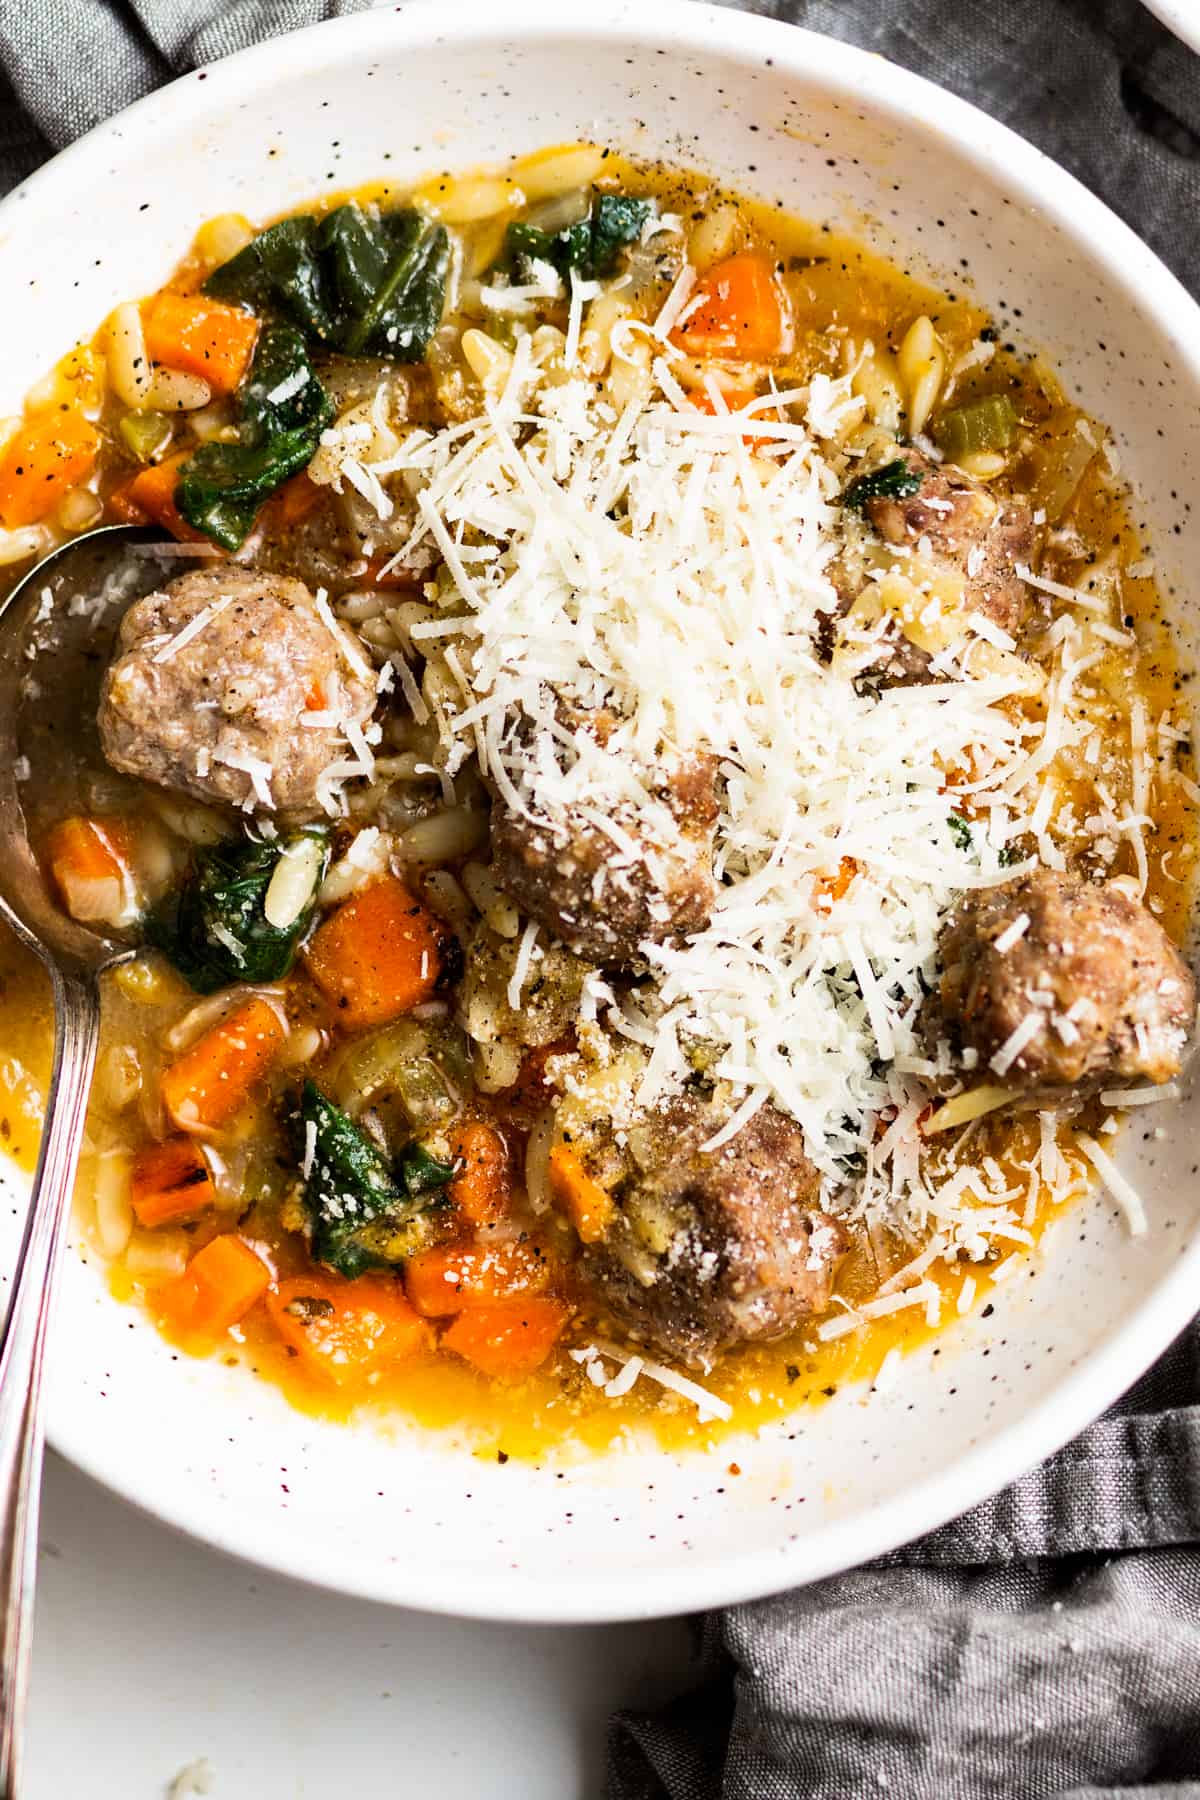 Close-up of Italian wedding soup in a bowl, garnished with shredded parmesan.